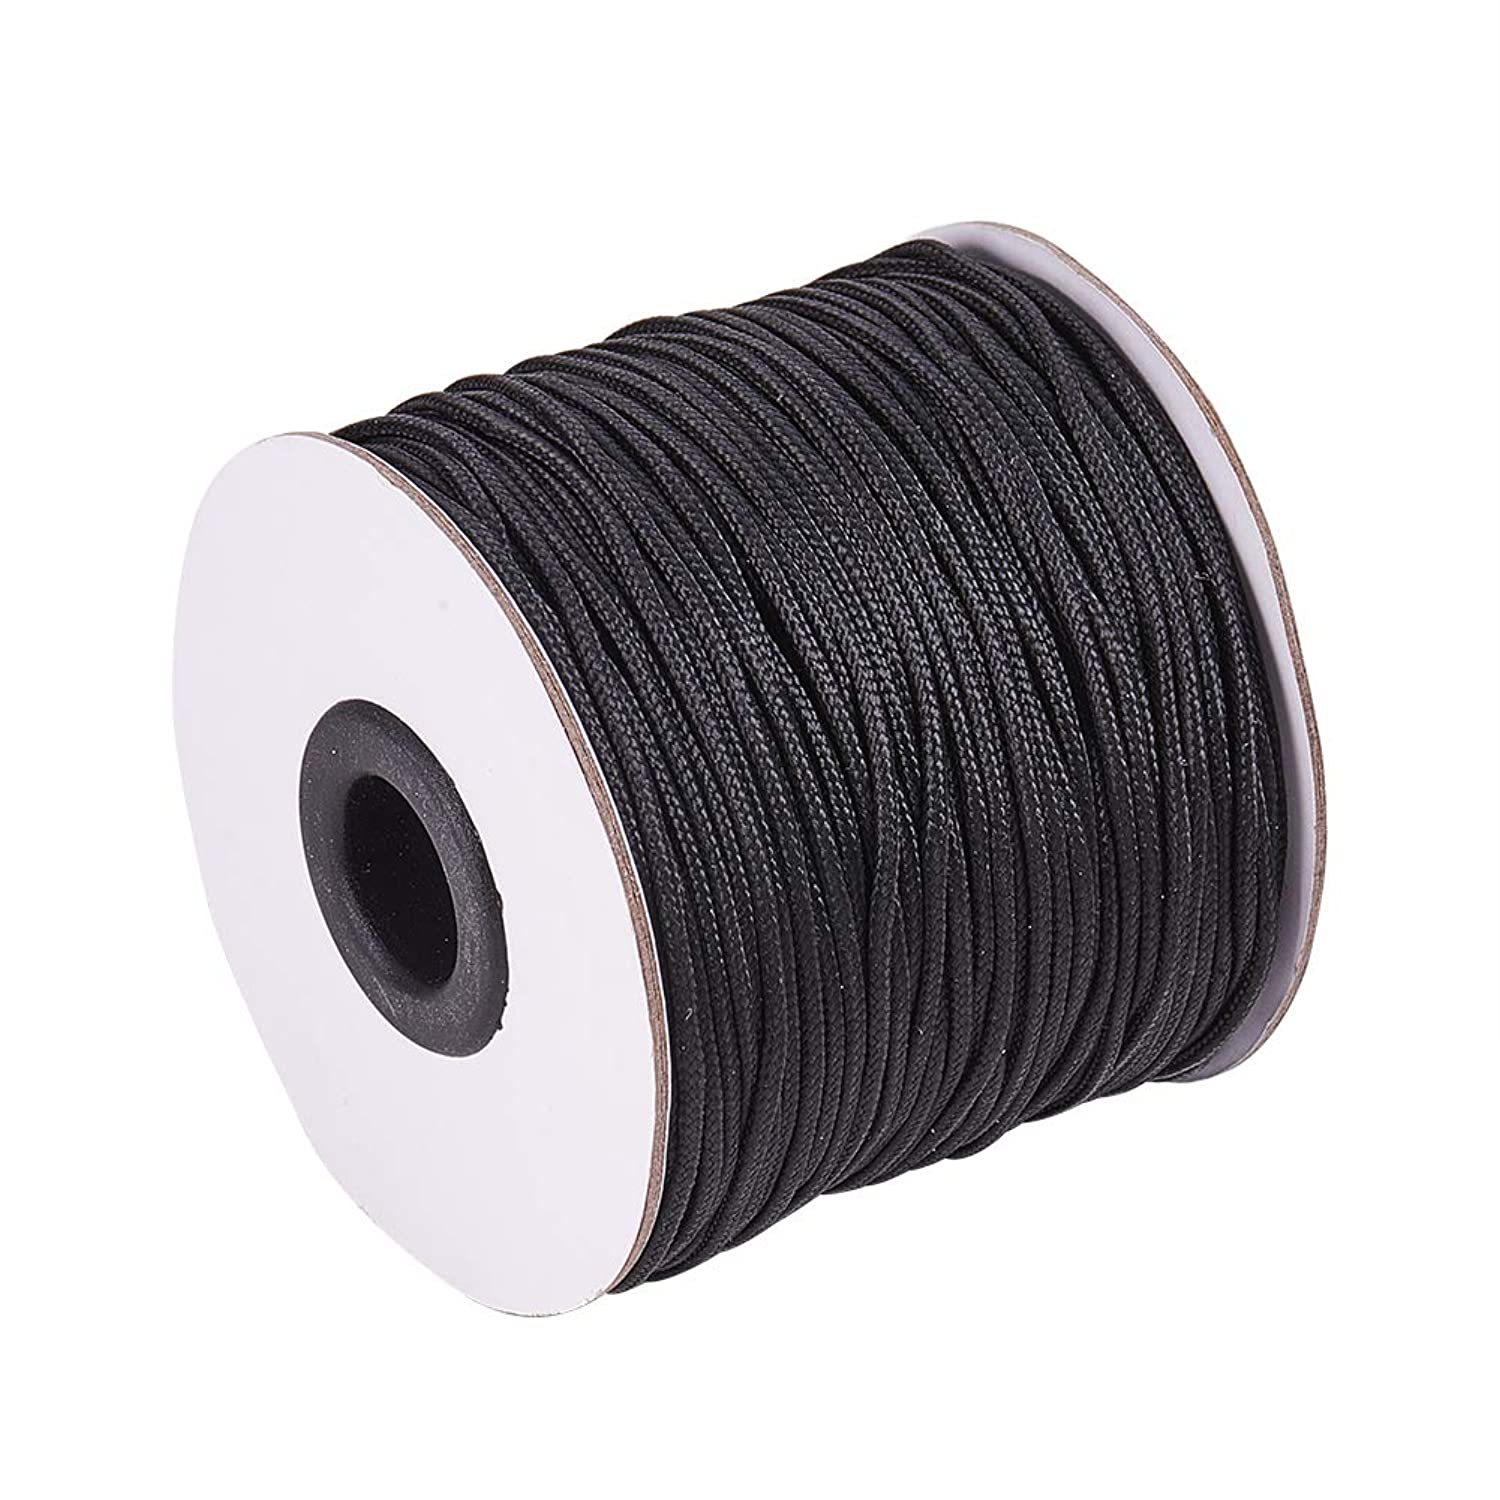 1.5Mm/ 100 Yards Black Nylon Braided Lift Shade Cord For Blind S..